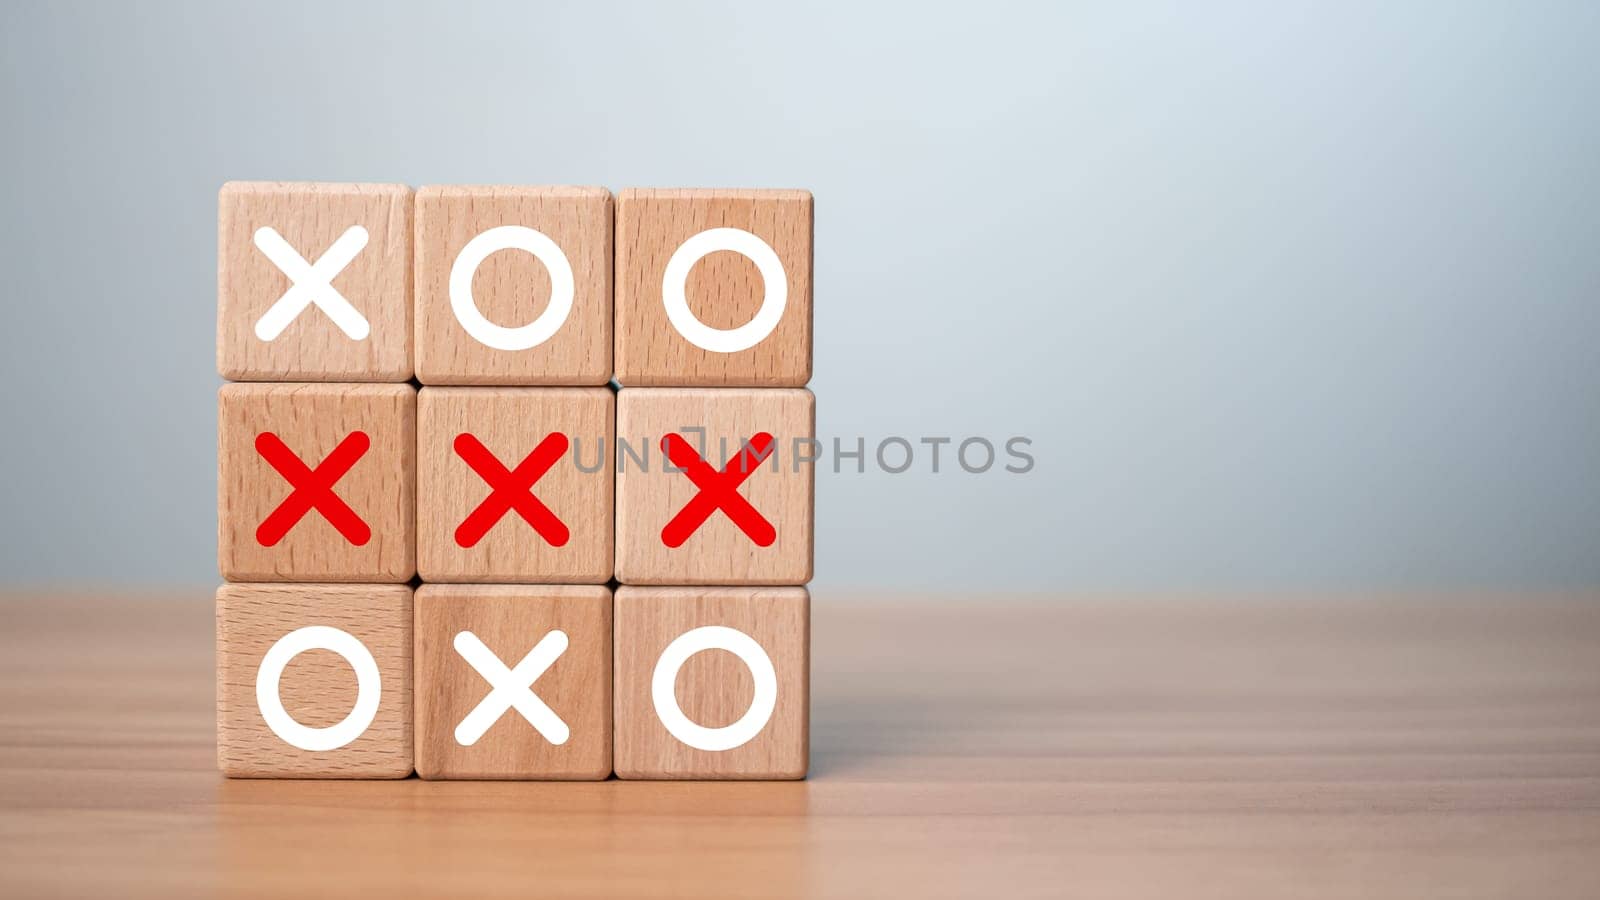 Tic Tac Toe game made of wooden blocks. Front view of wooden OX game on wooden table.Business marketing strategy planning concept. Business competitor assessment concept. by Unimages2527